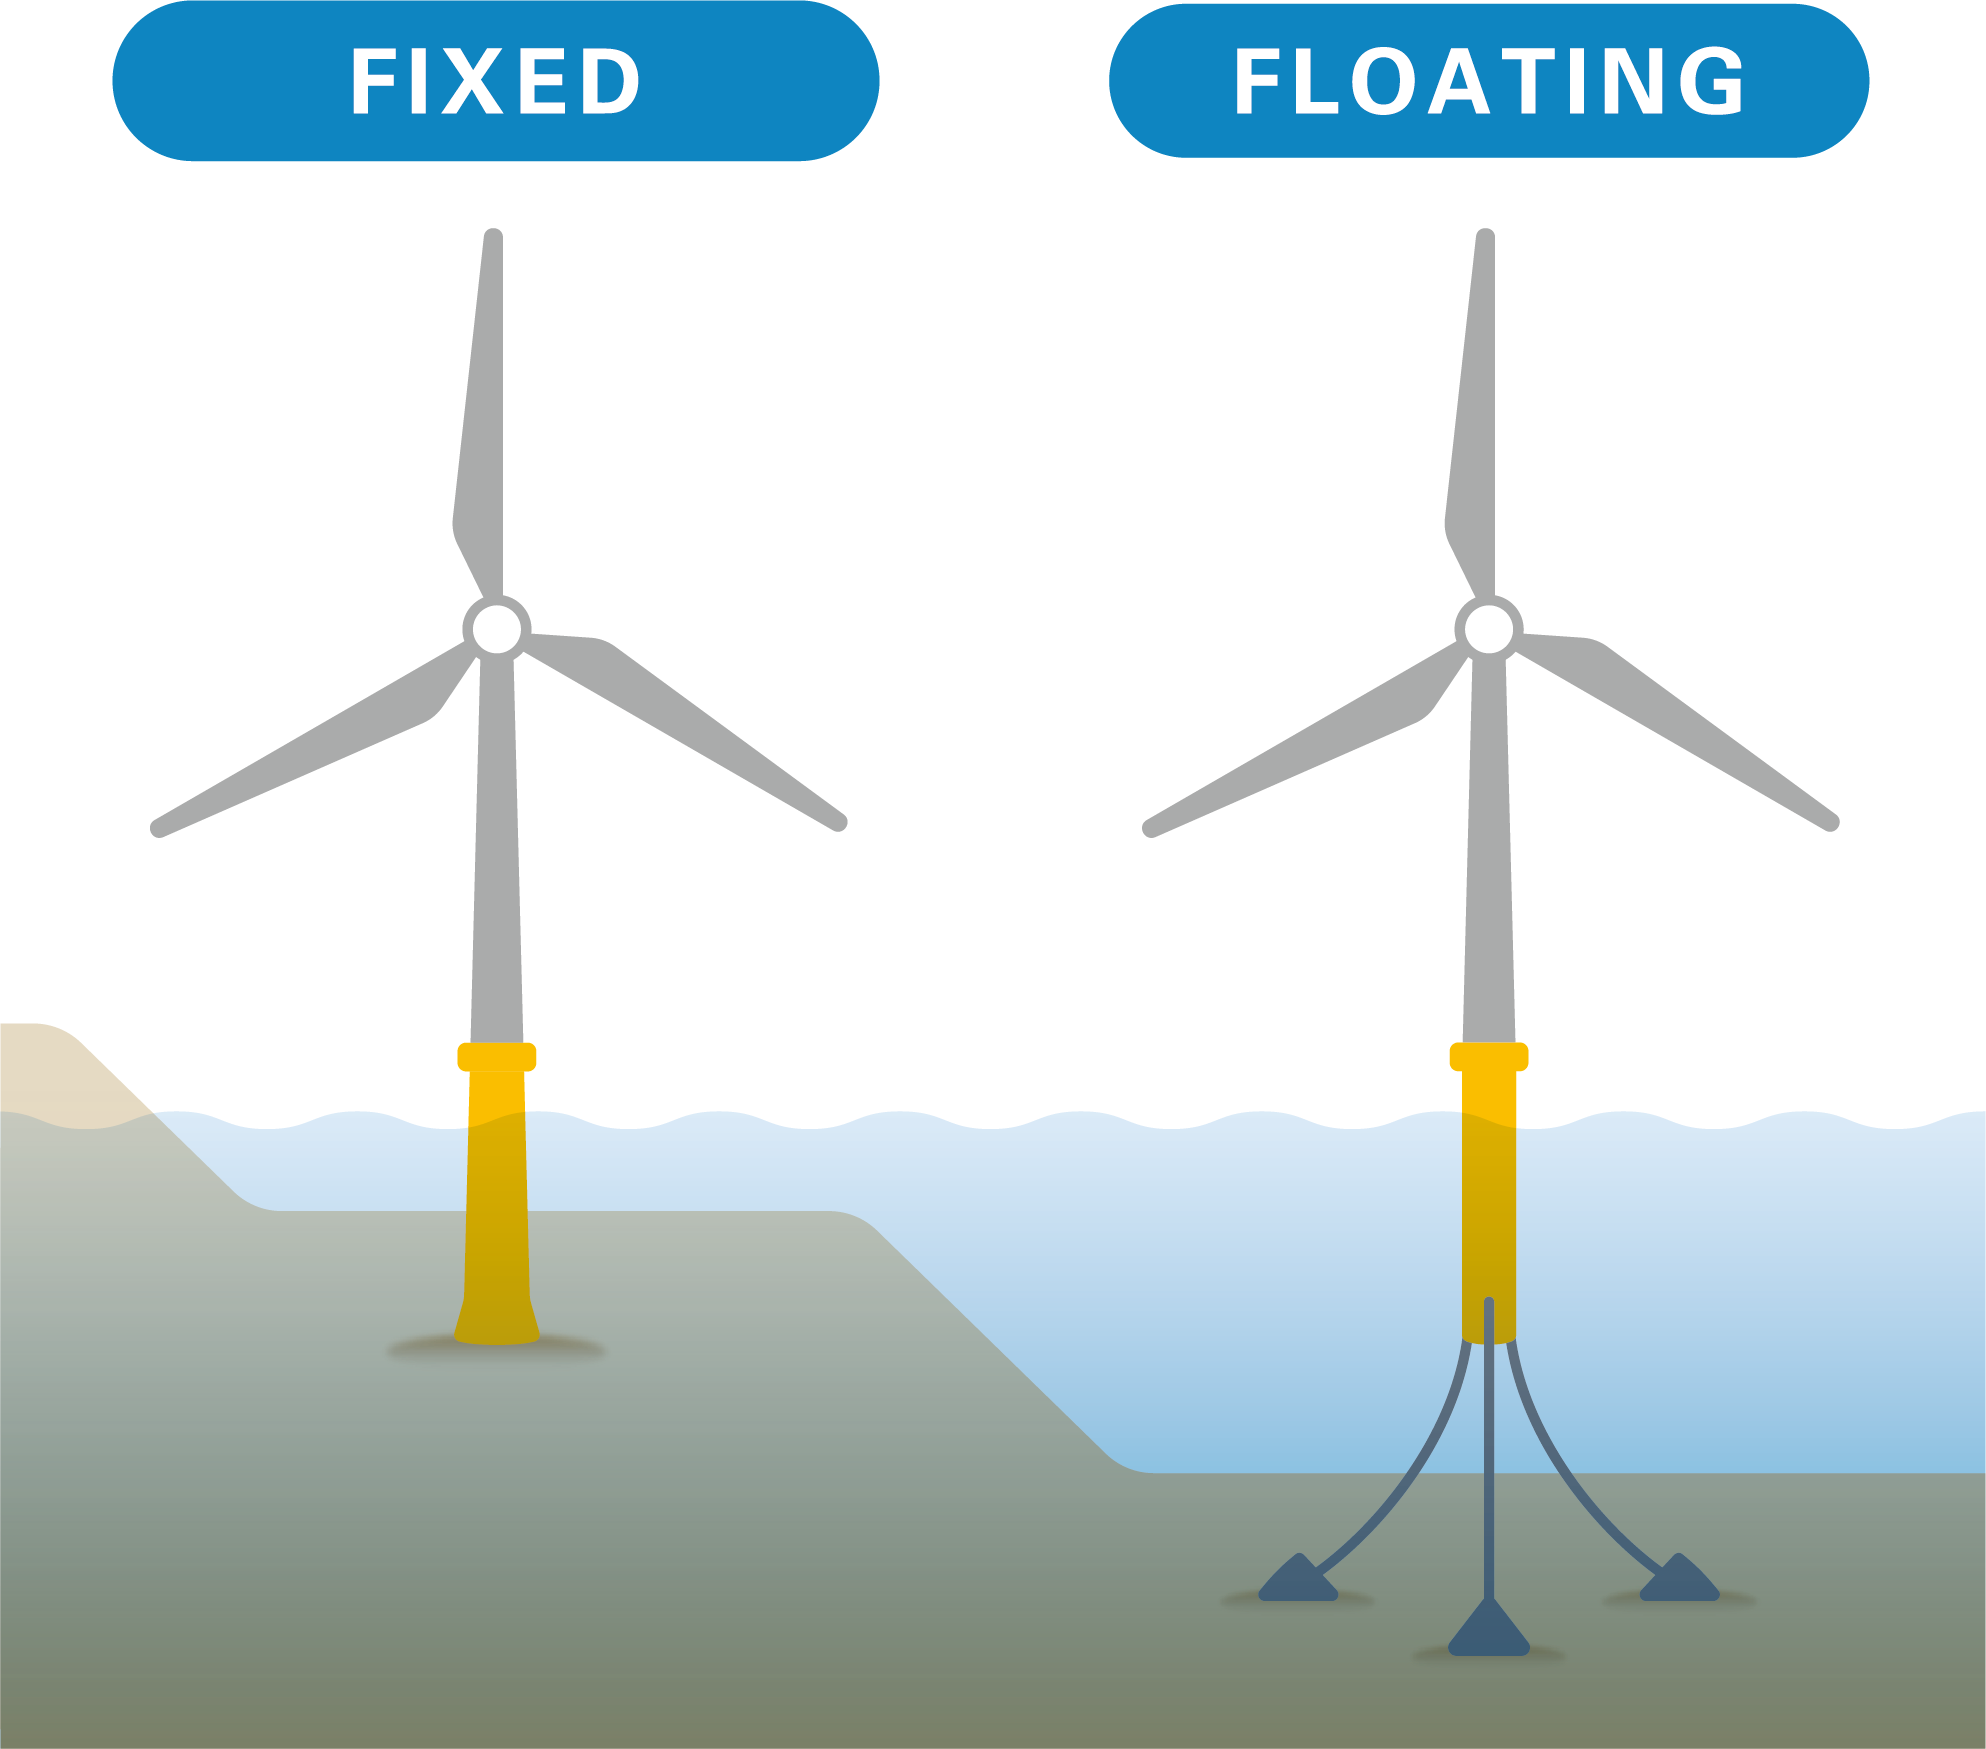 Image of Areas suitable for fixed or floating wind turbines depend on the depth of the waters. The floating type is very suitable for a country like Japan, where shallow waters are limited. Floating turbines are still in the pilot stage, with expectations rising for developments that also apply the strengths of Japanese technology in areas such as shipbuilding